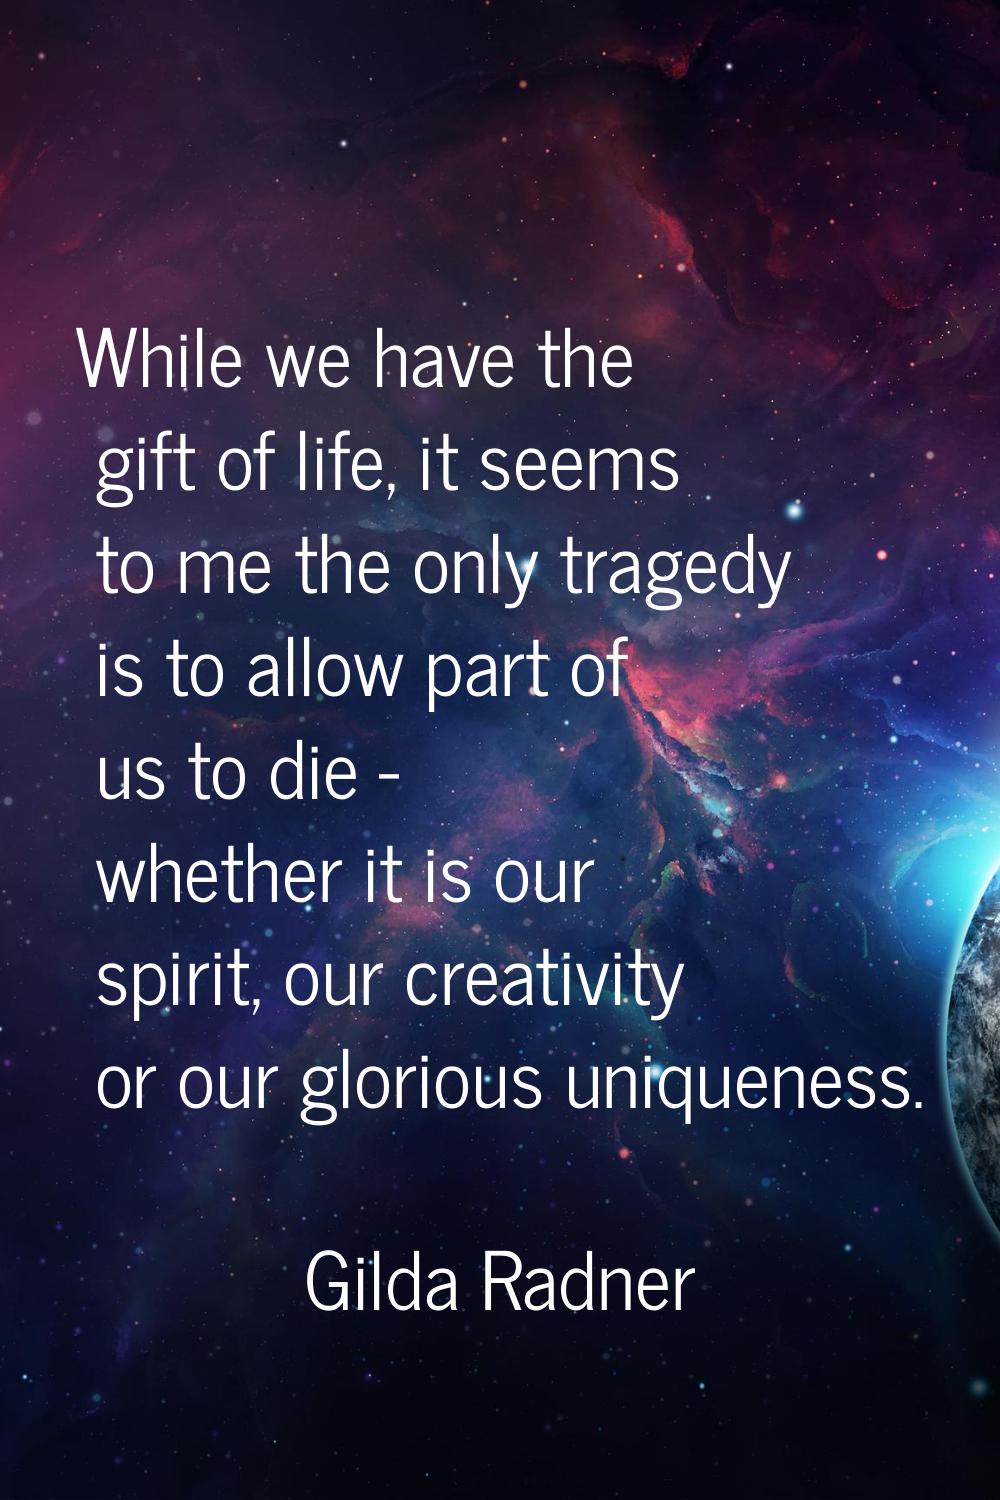 While we have the gift of life, it seems to me the only tragedy is to allow part of us to die - whe